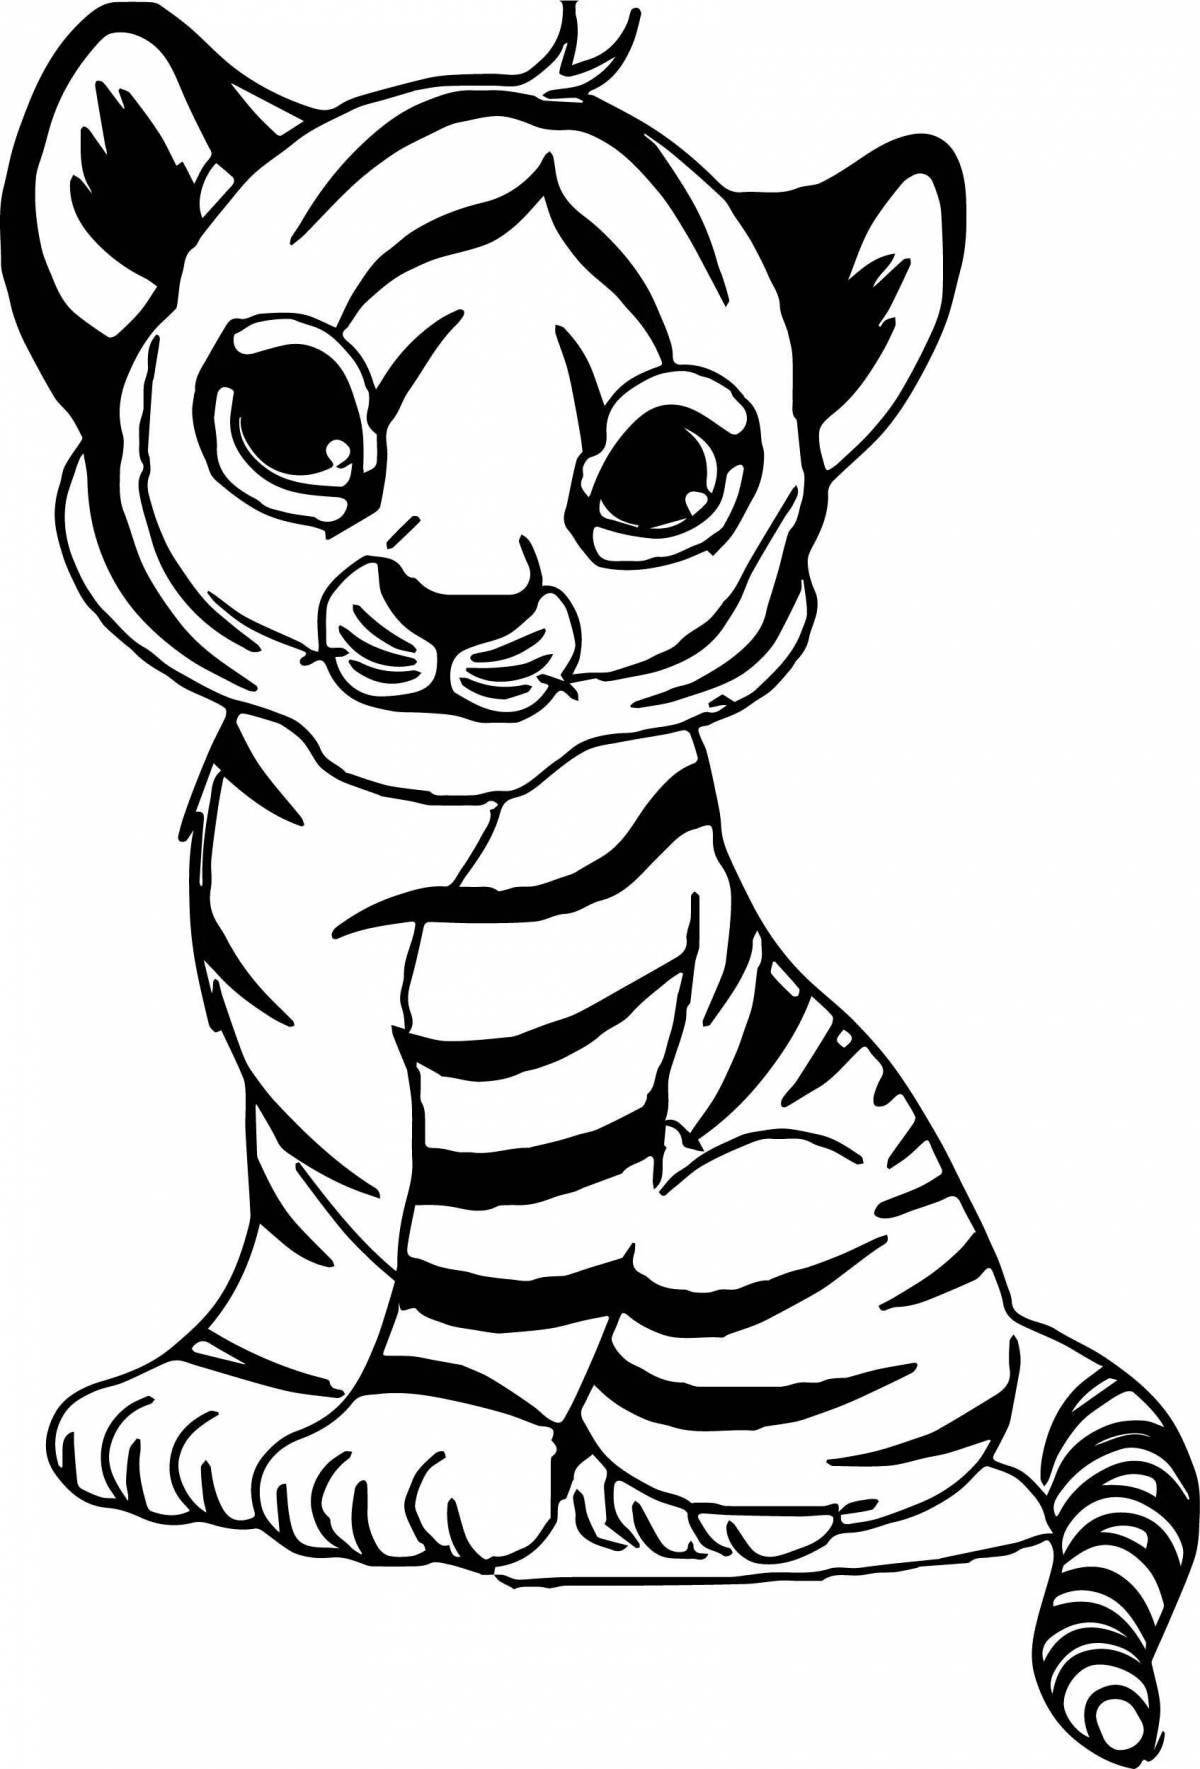 Delightful bright animal coloring pages